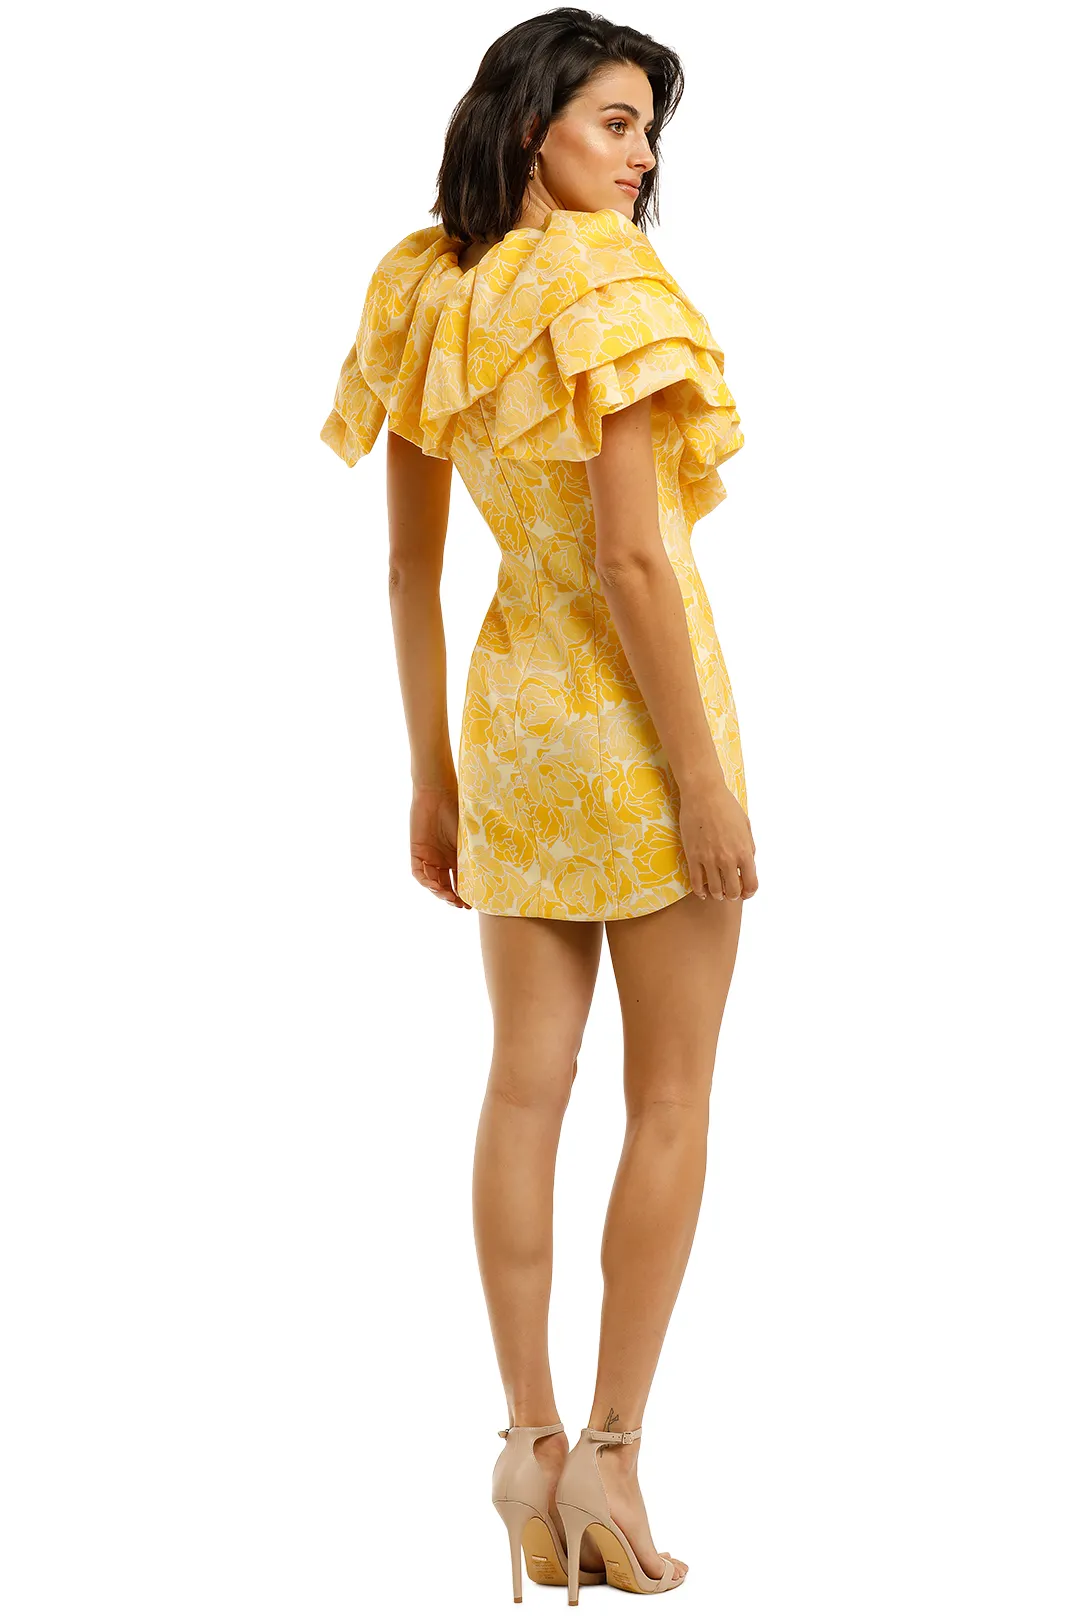 Rent the Beston Dress Lemon for wedding guest occasions